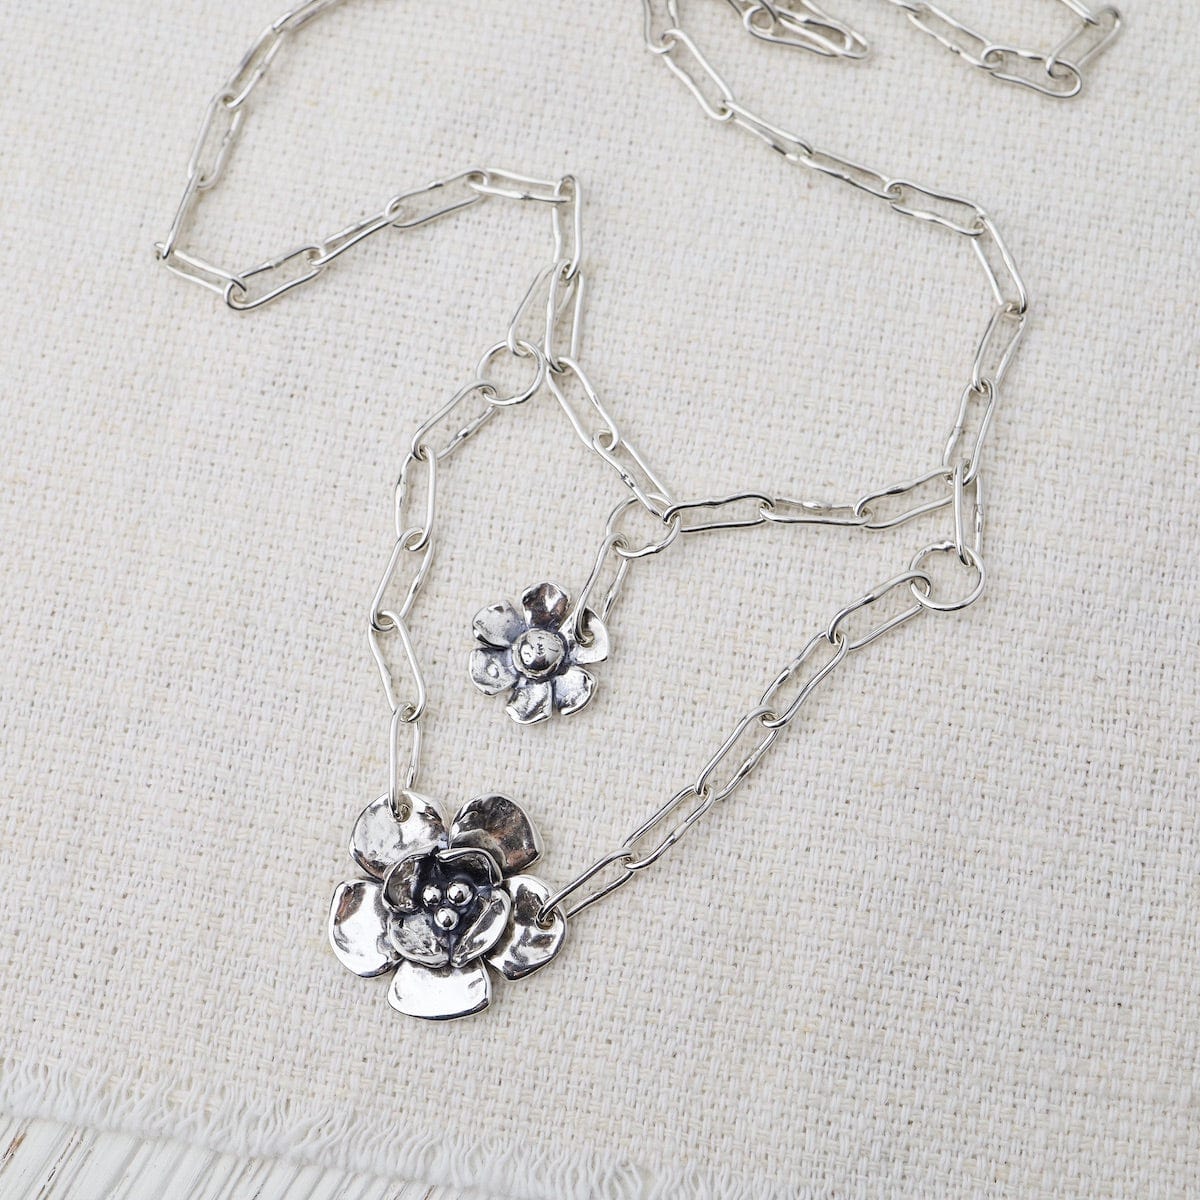 NKL Chain Layer Necklace With Daisy & Double Dogwood on Short Oval Chain